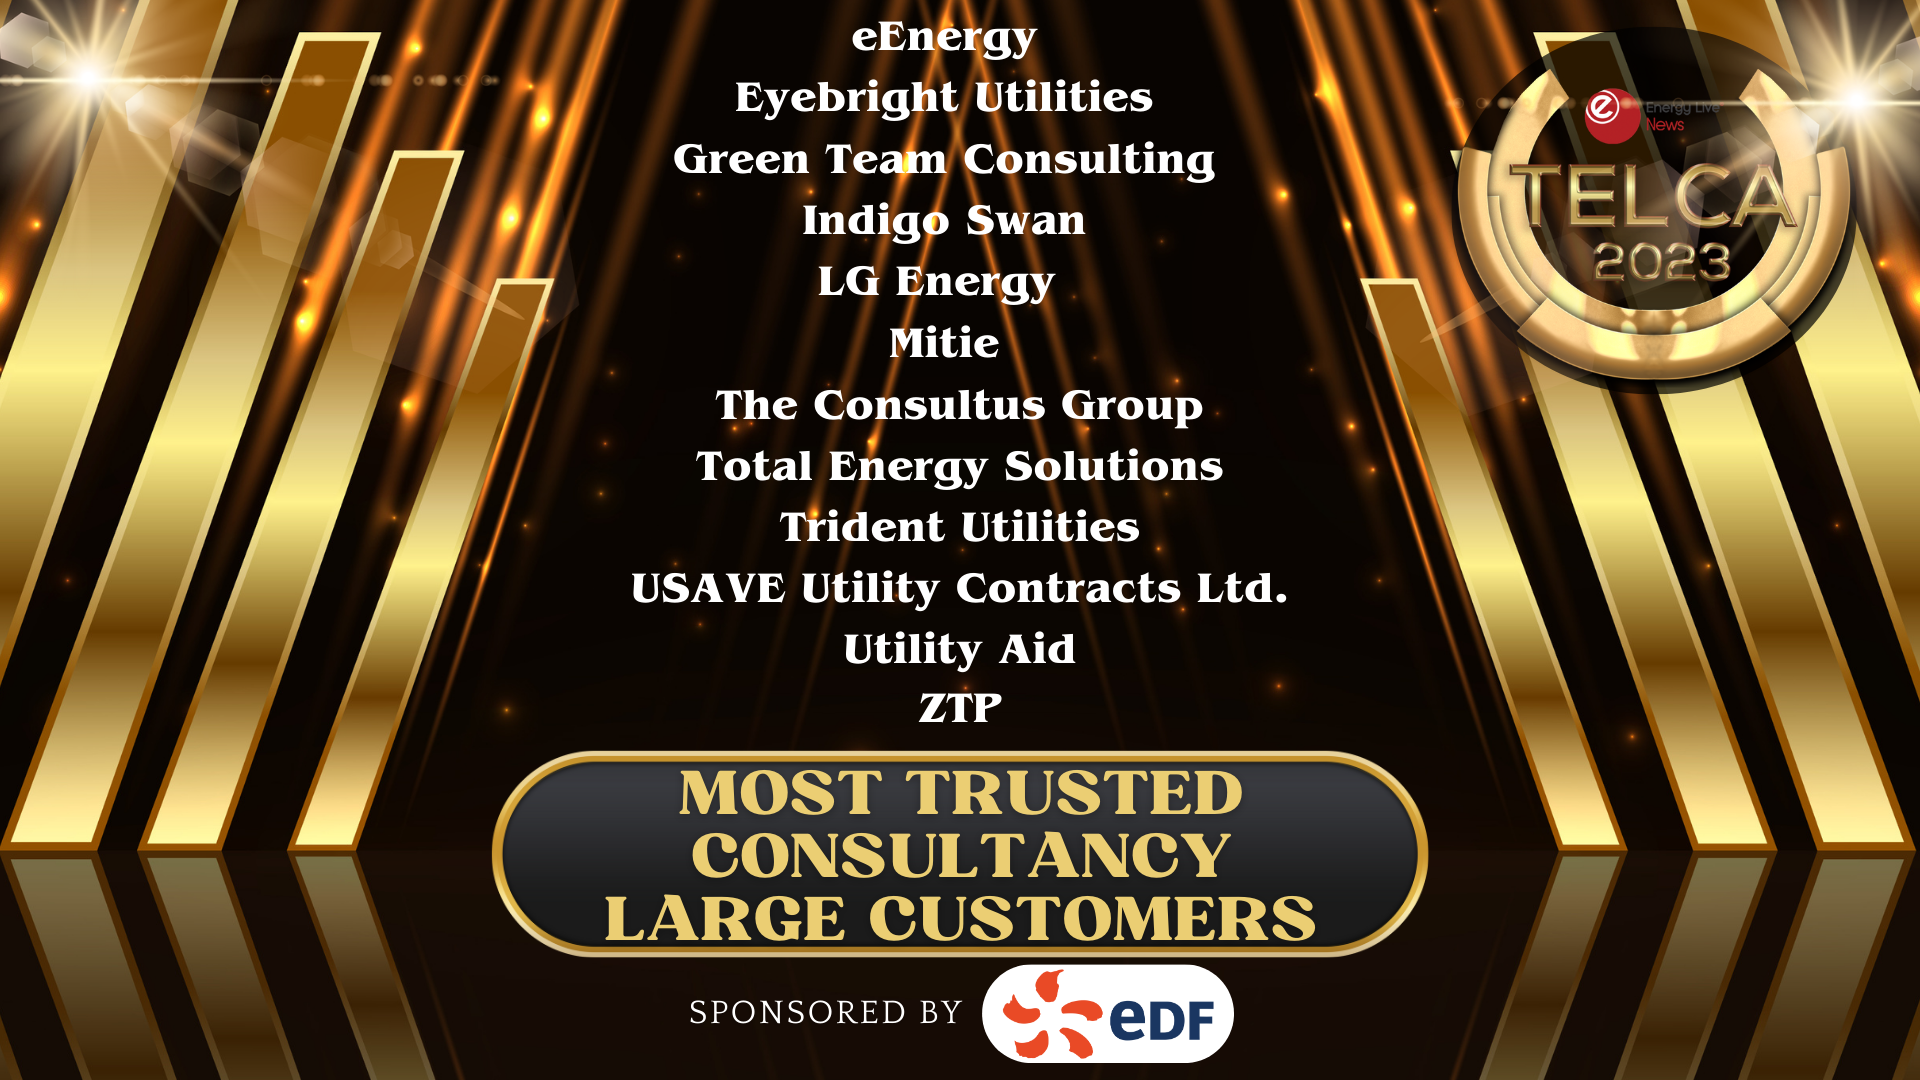 Most Trusted Consultancy Large